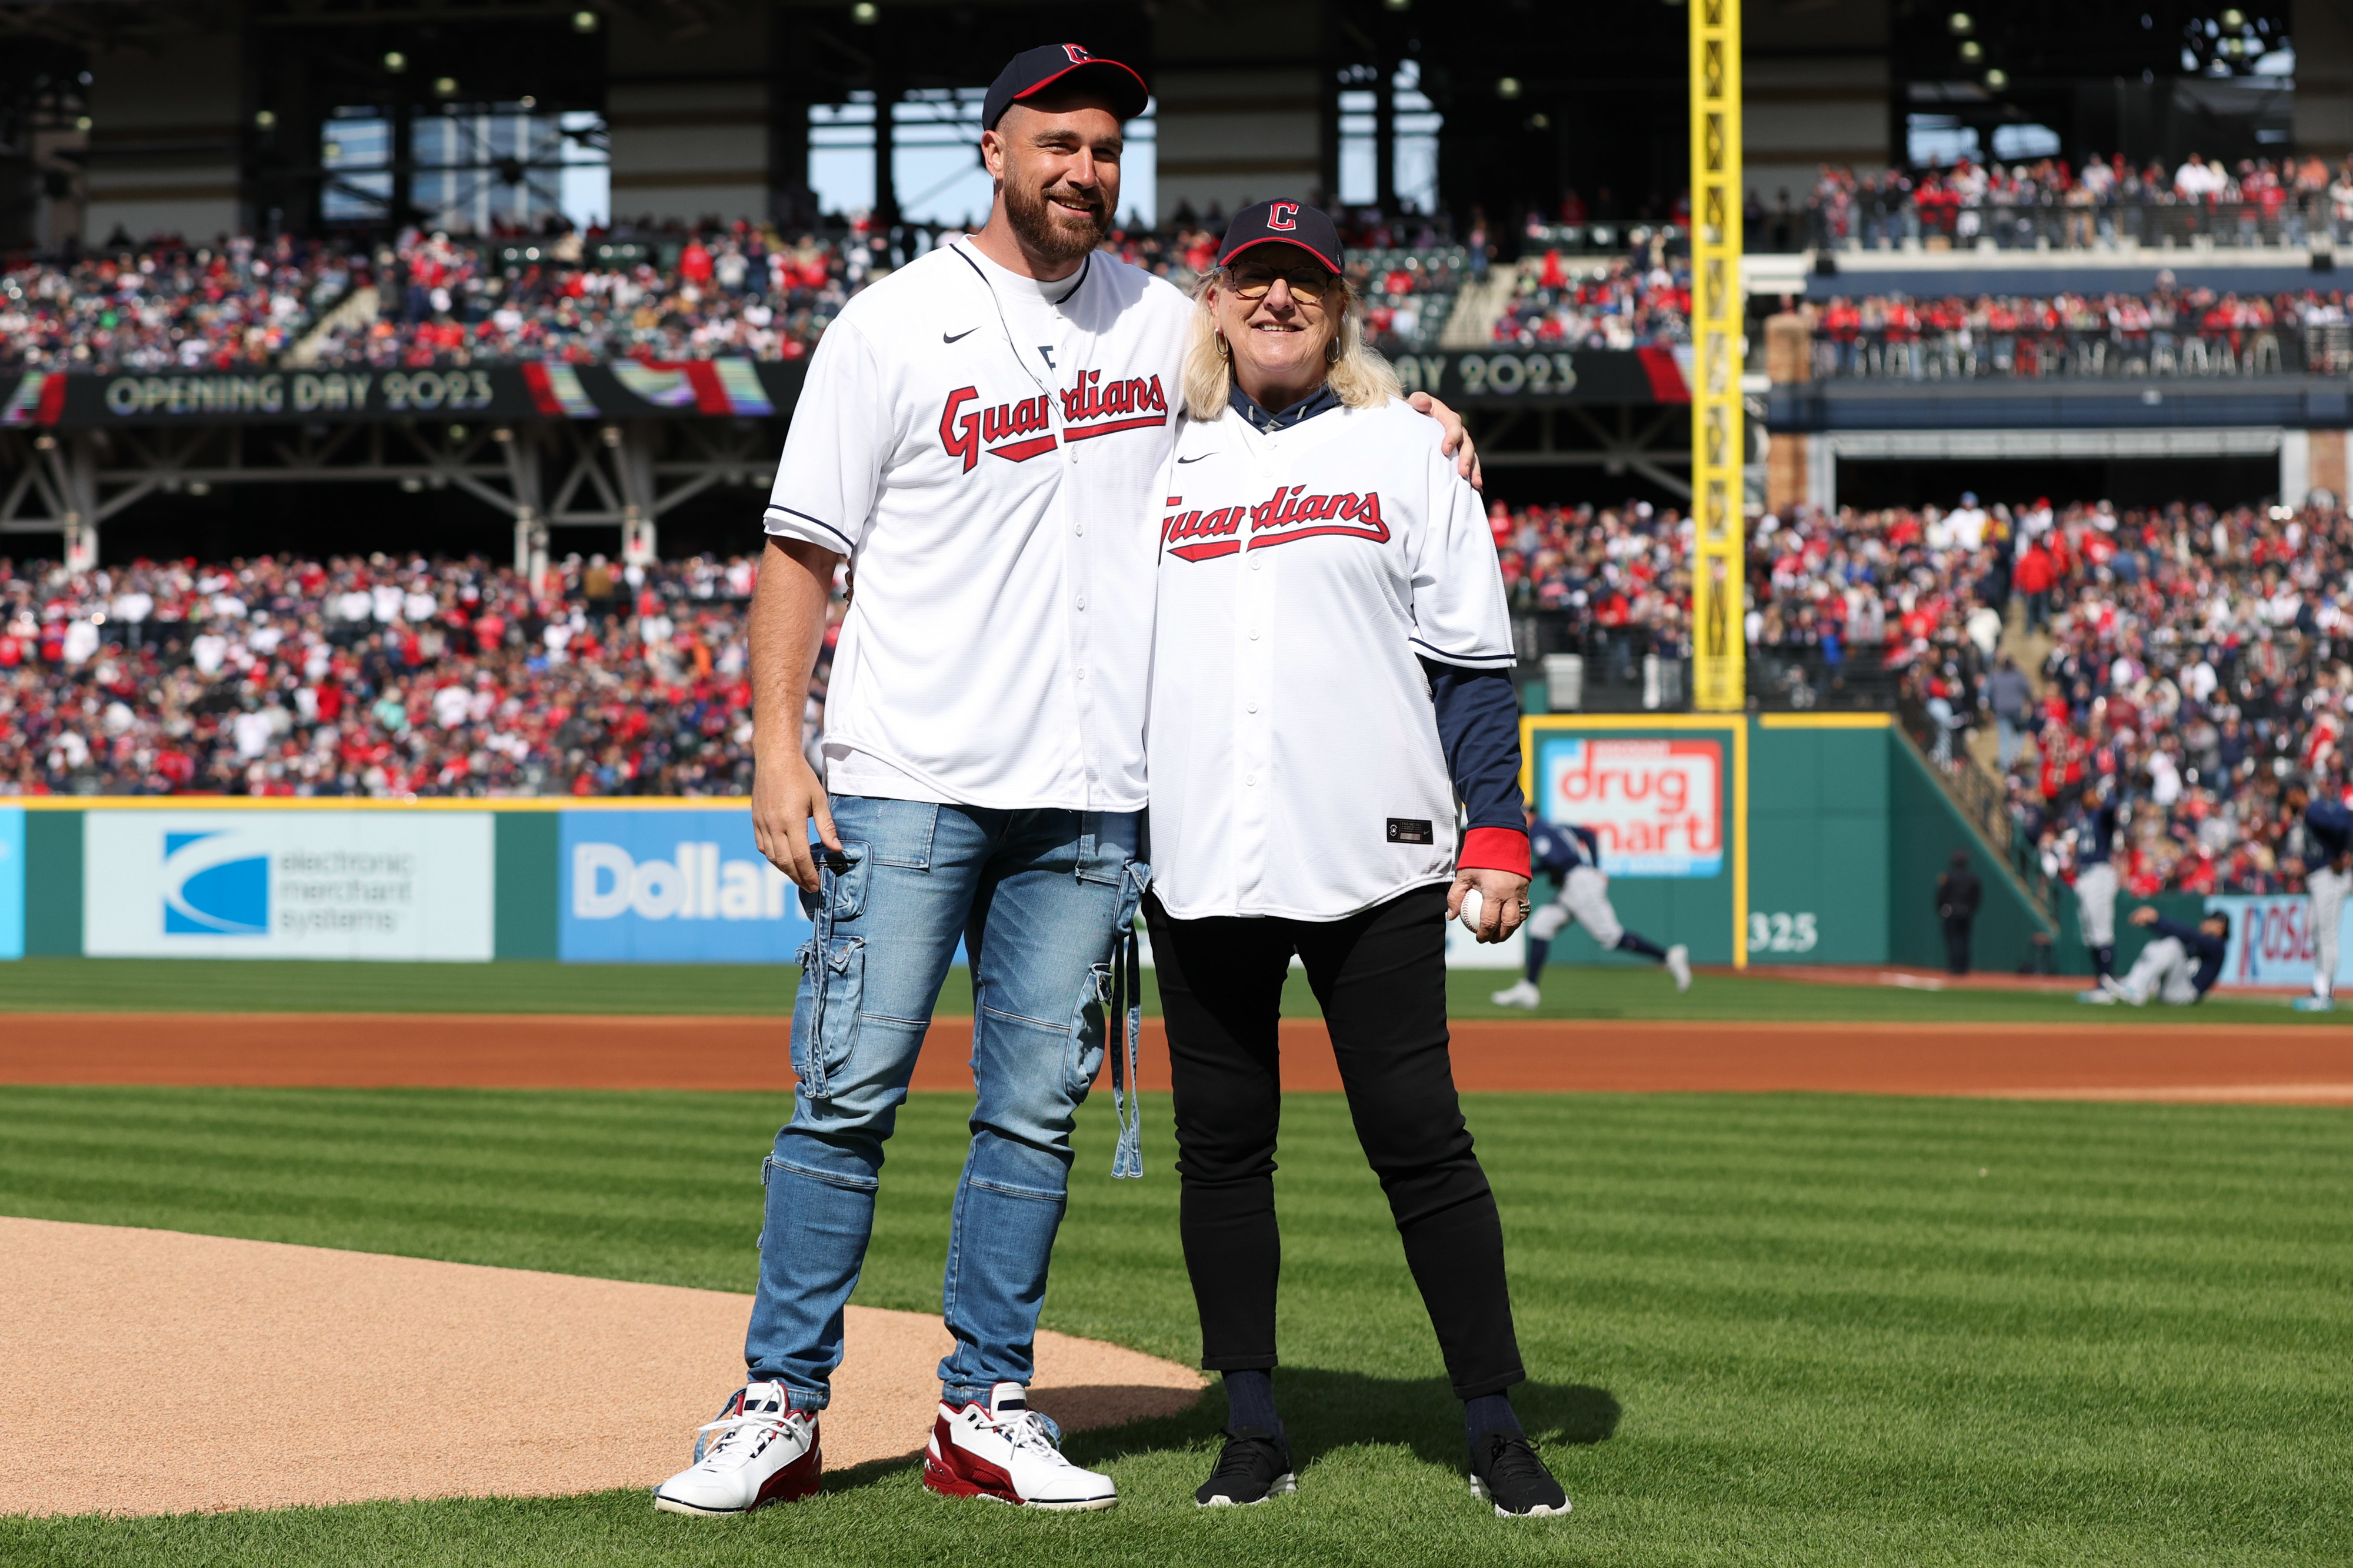 Travis and Donna Kelce on the field at a baseball game